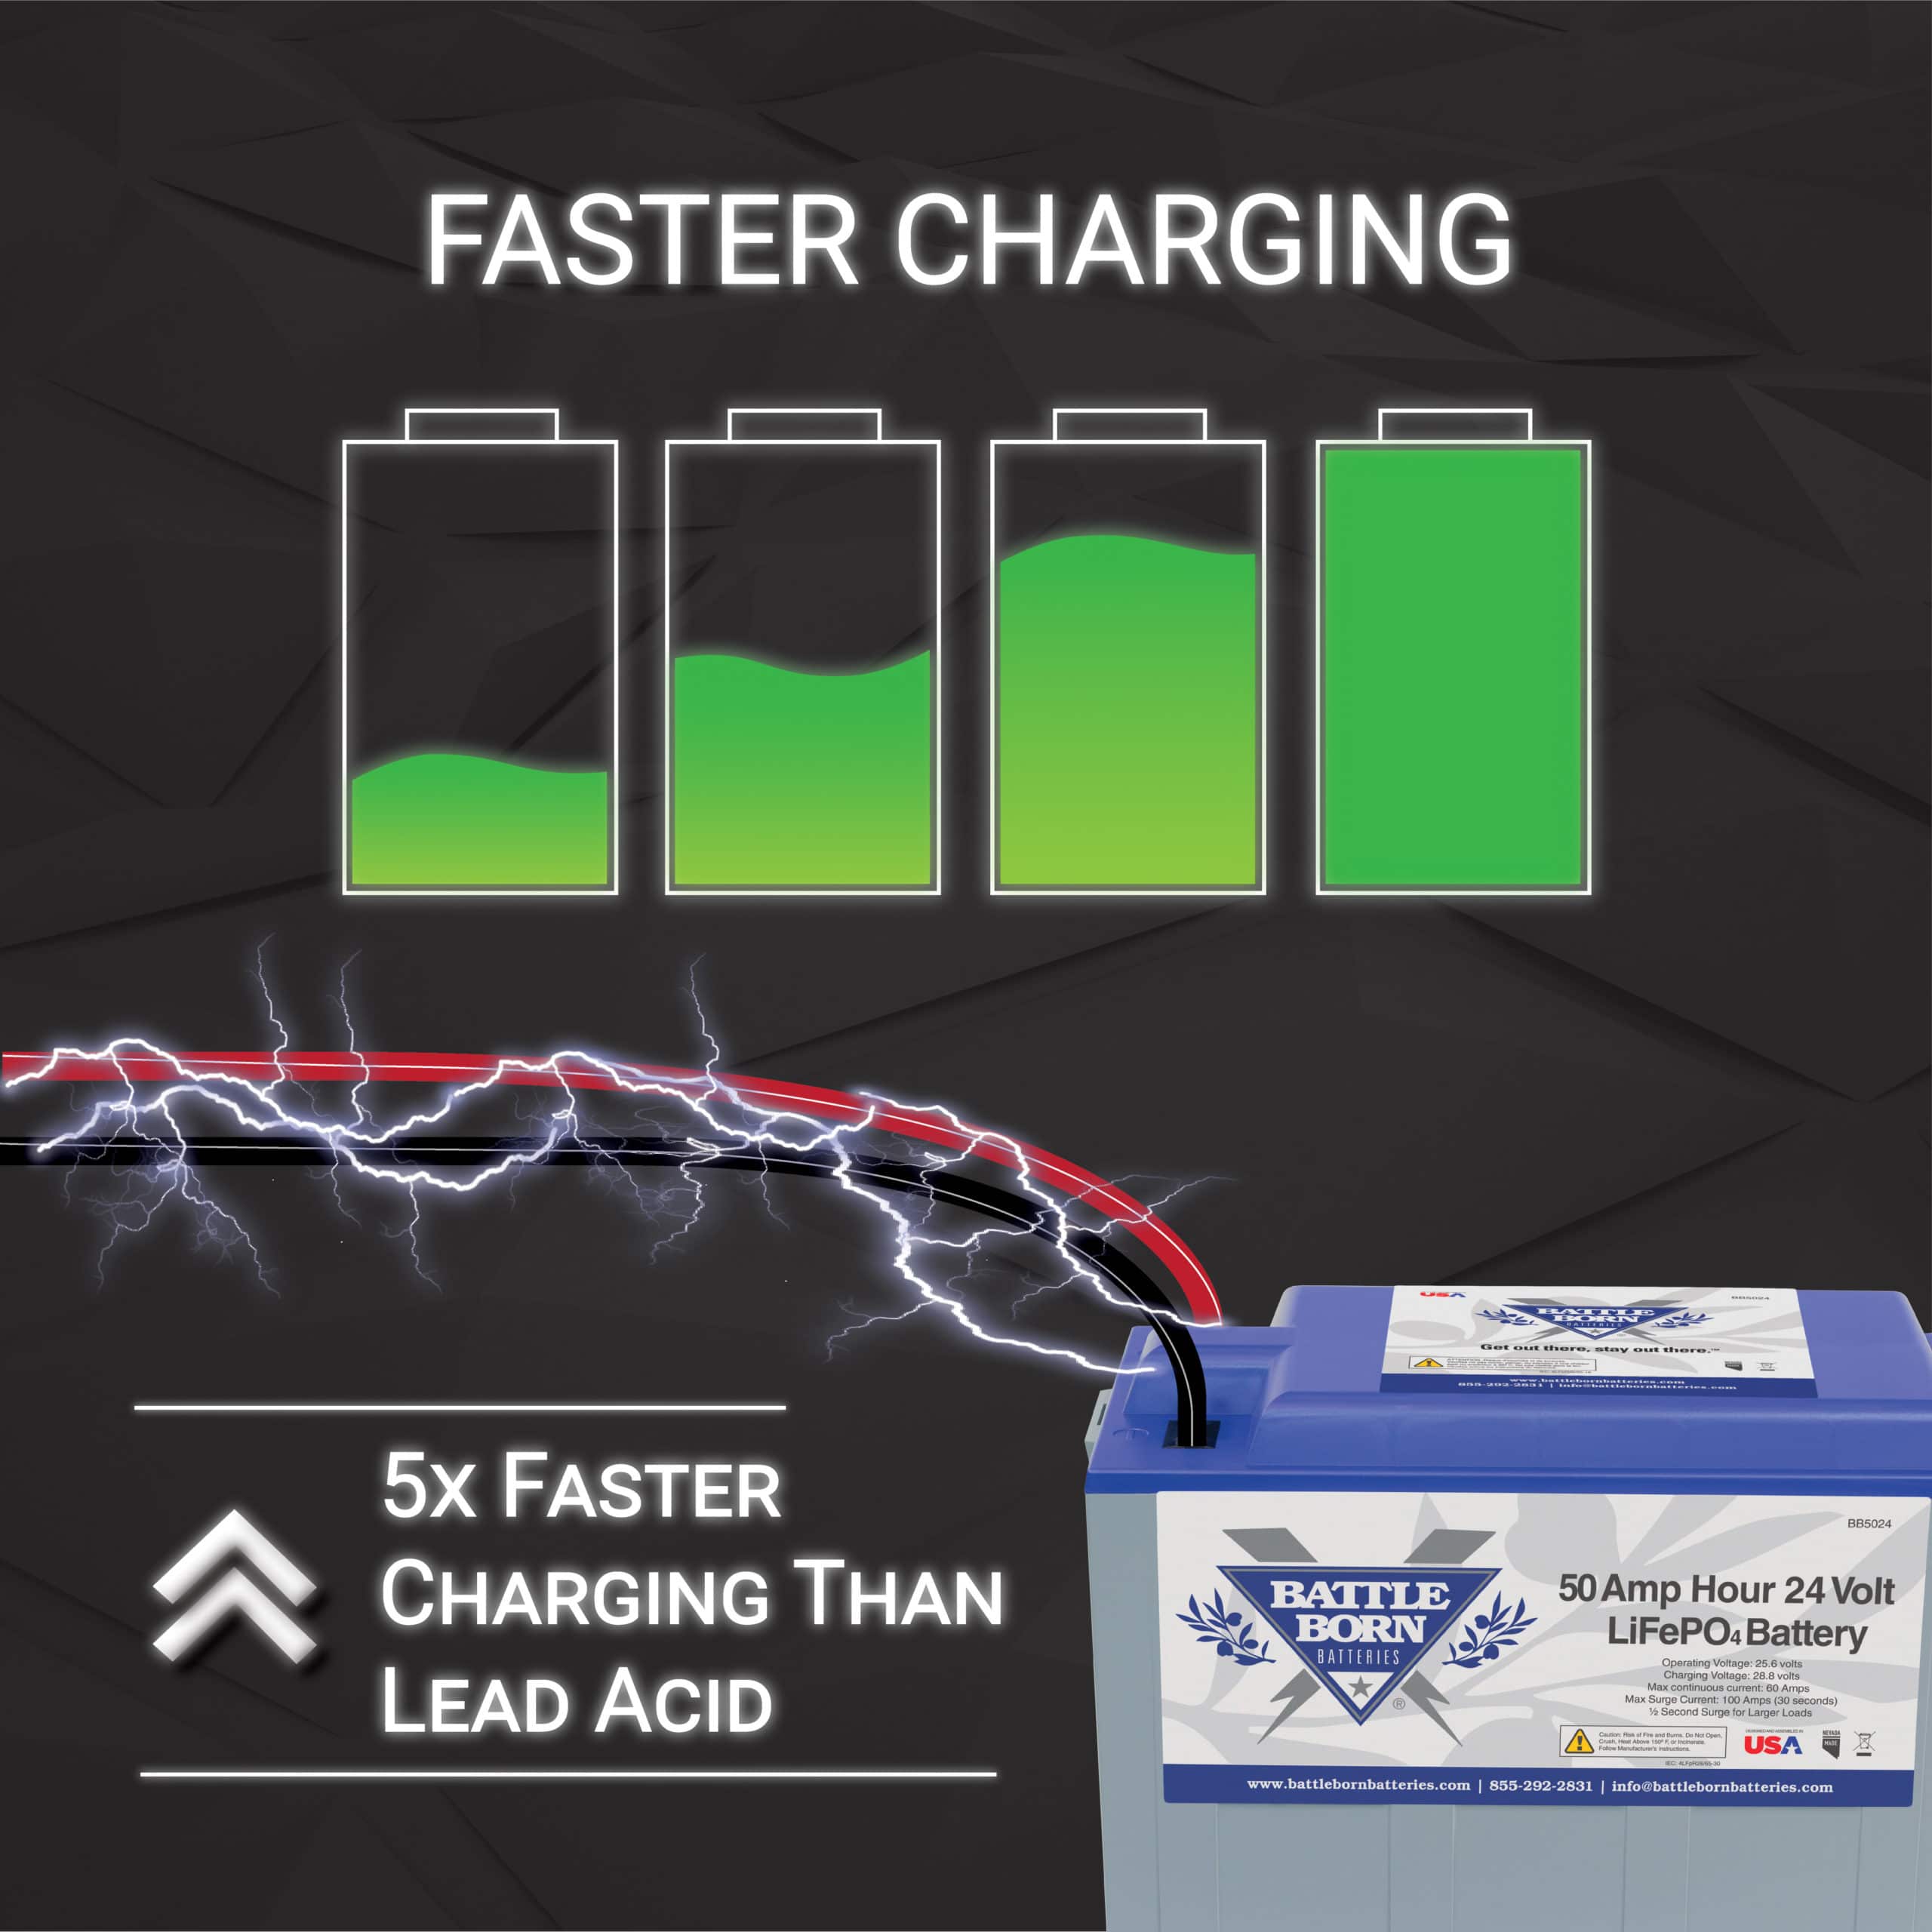 lithium ion battery with five times faster charging than lead acid